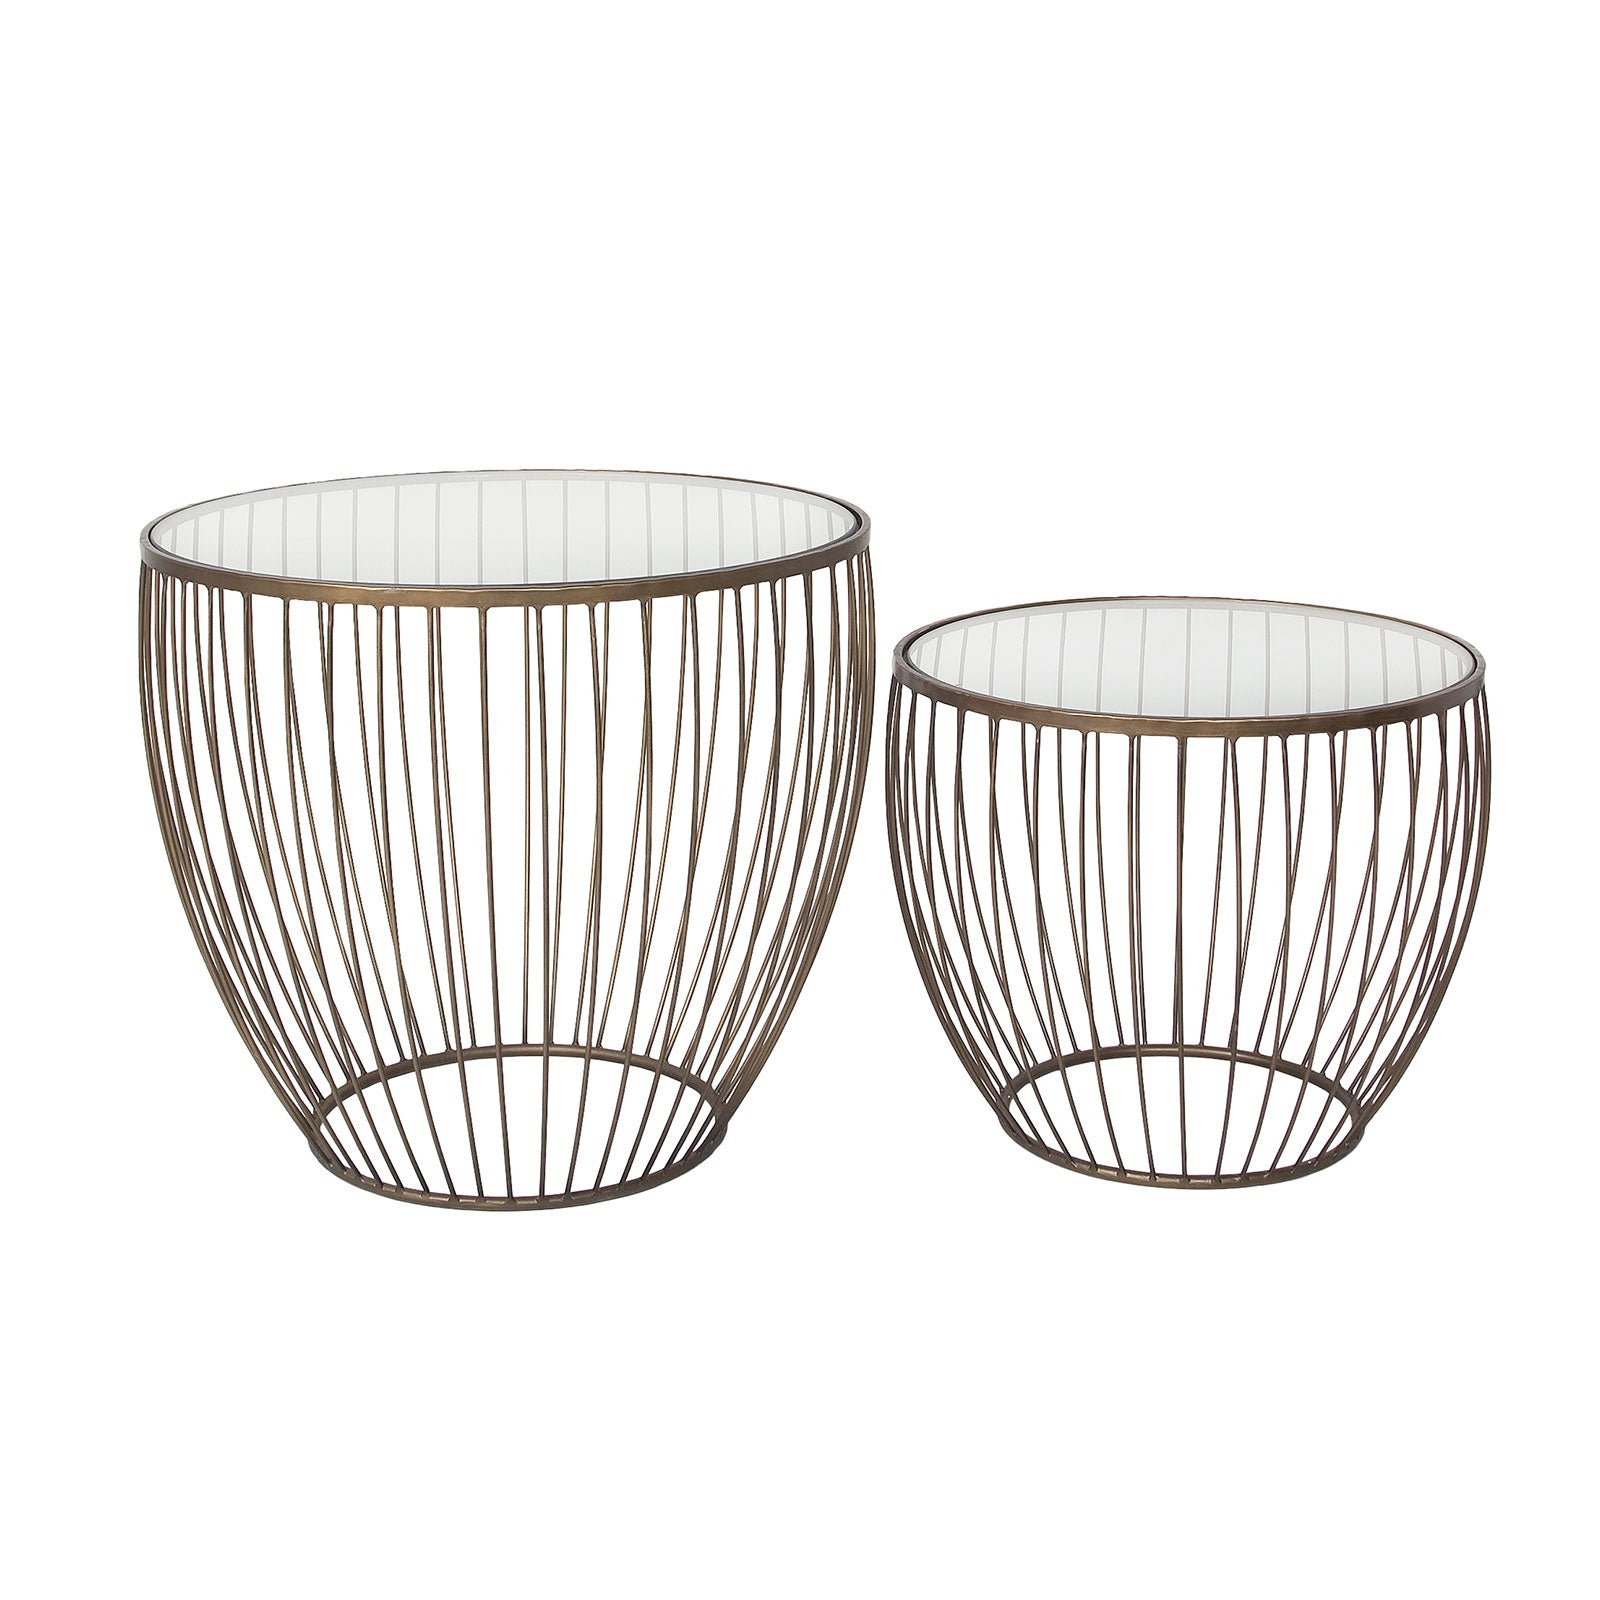 Cyclone Glass Accent Tables